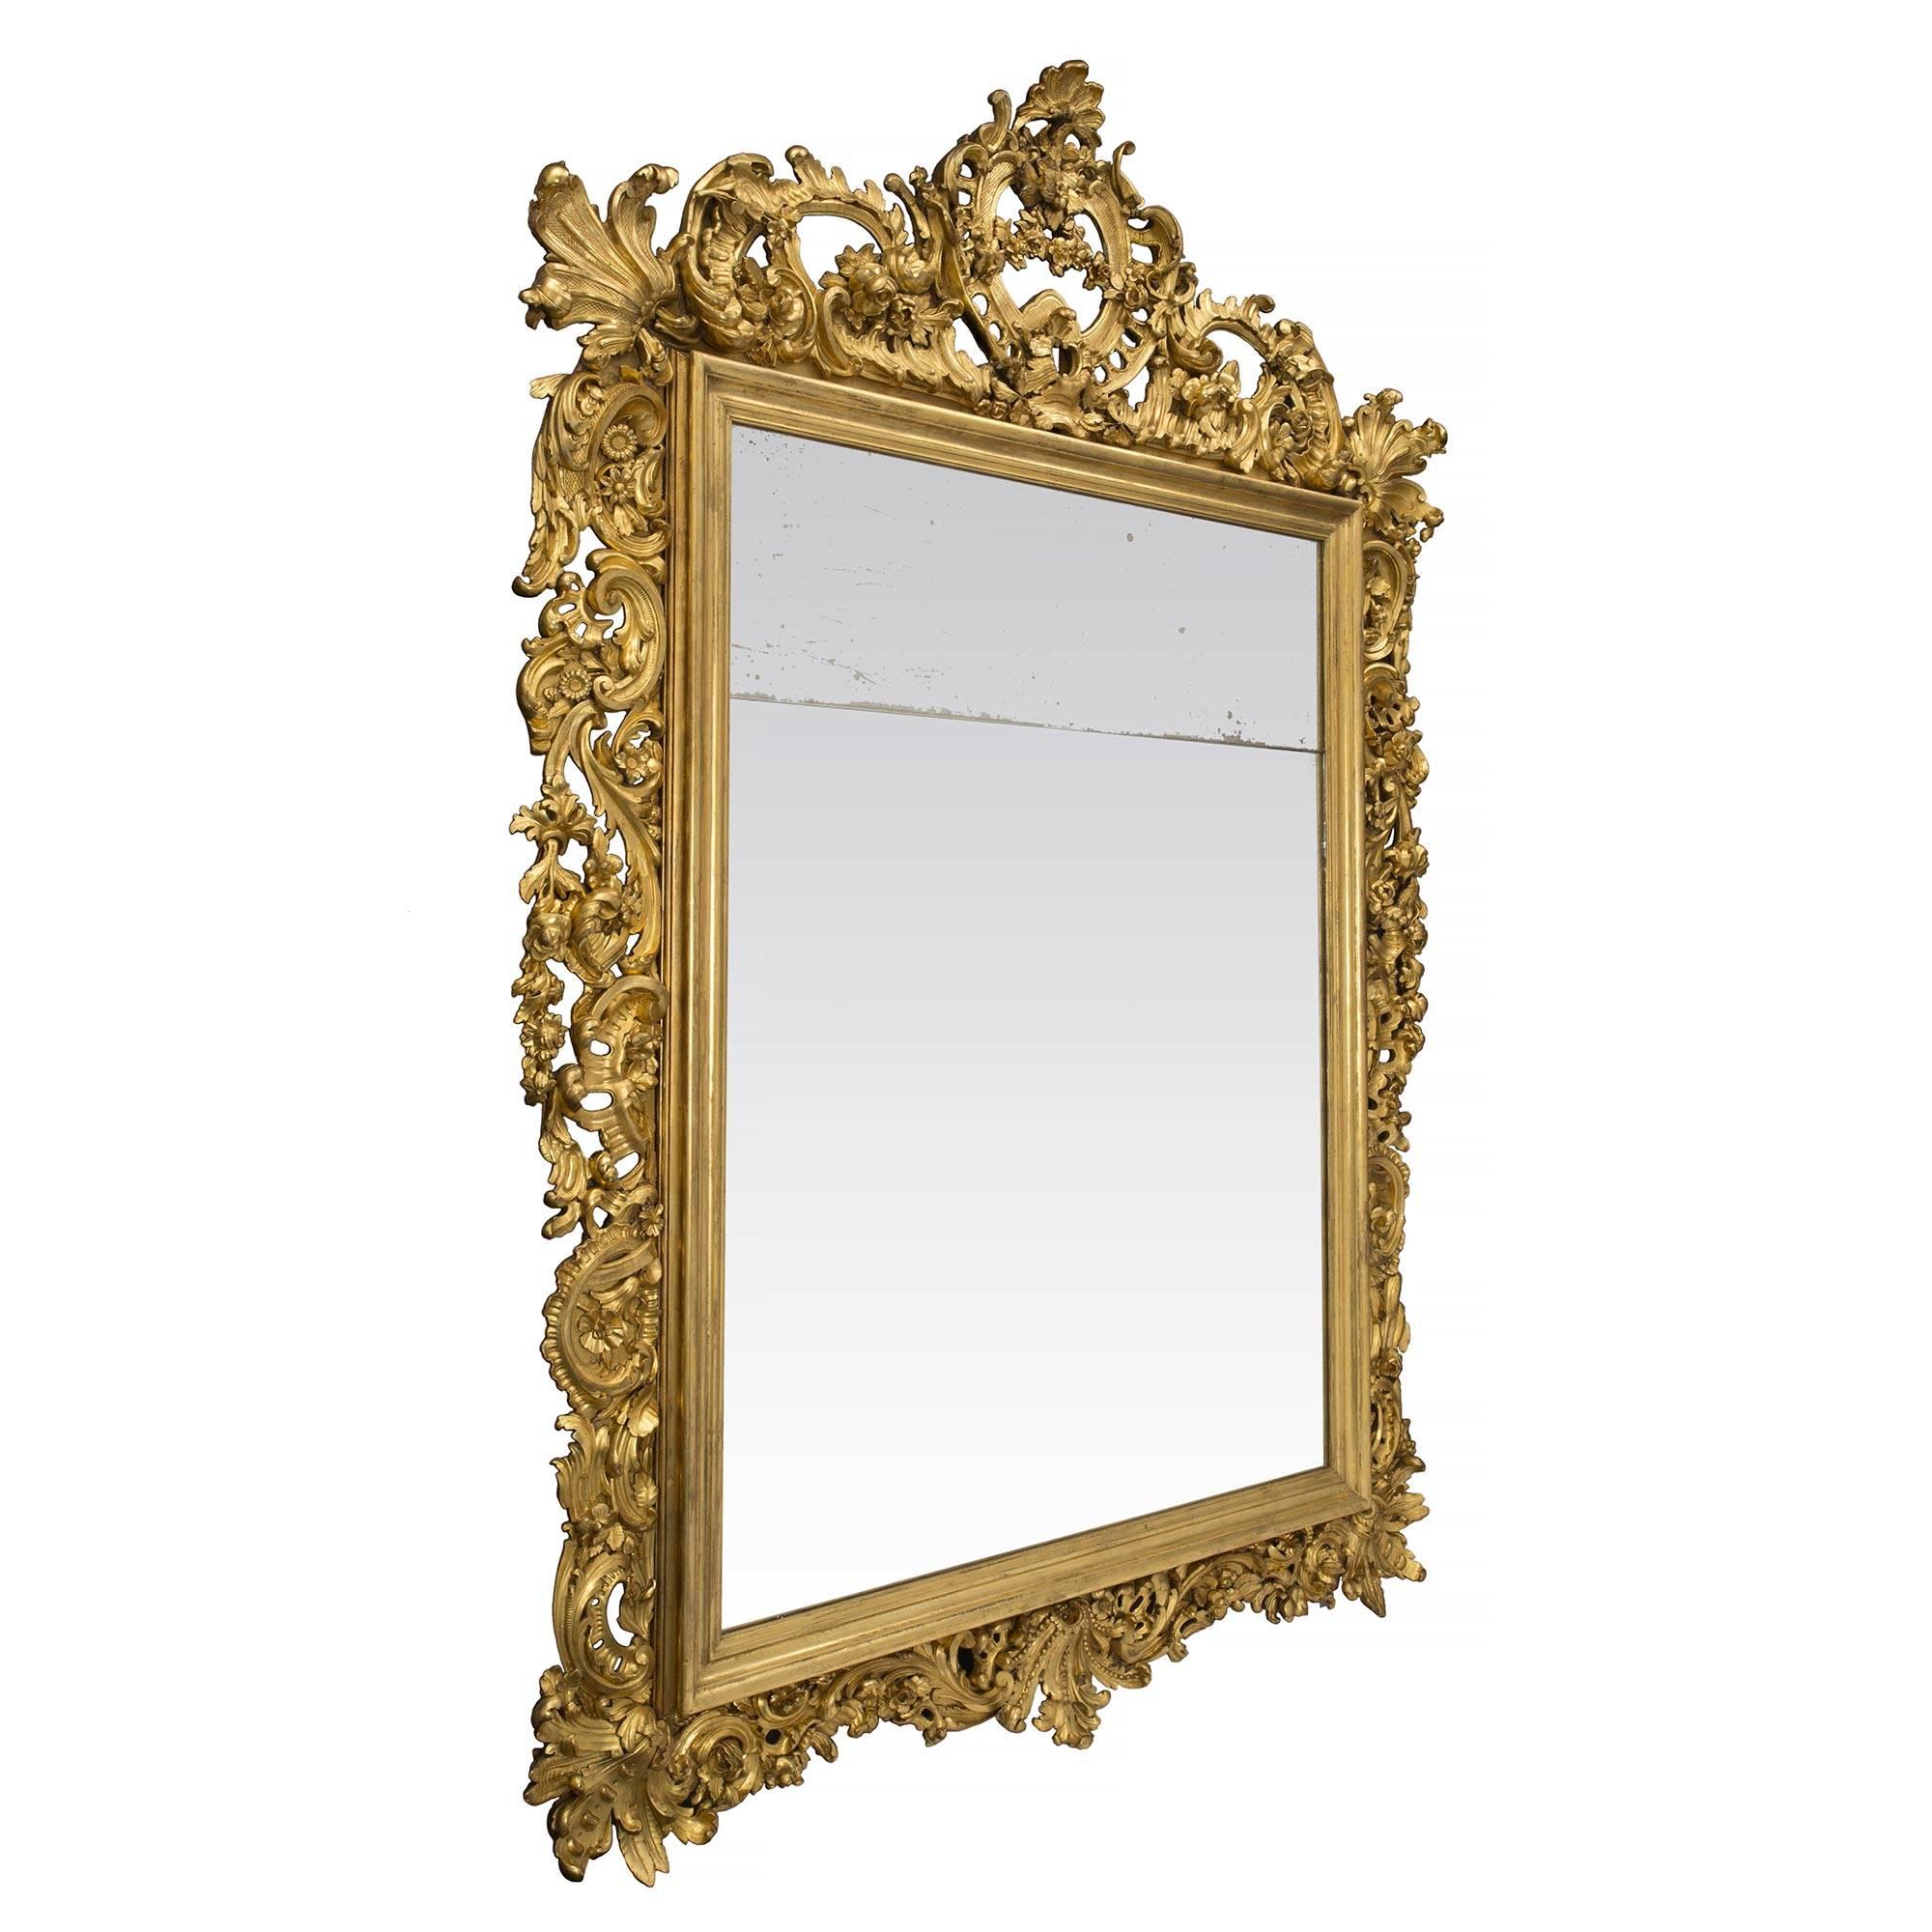 A most impressive and large scale Italian 19th century Baroque style giltwood mirror. The original rectangular mirror plate is framed within a fine mottled giltwood border. Extending throughout the frame are sensational and richly detailed carvings